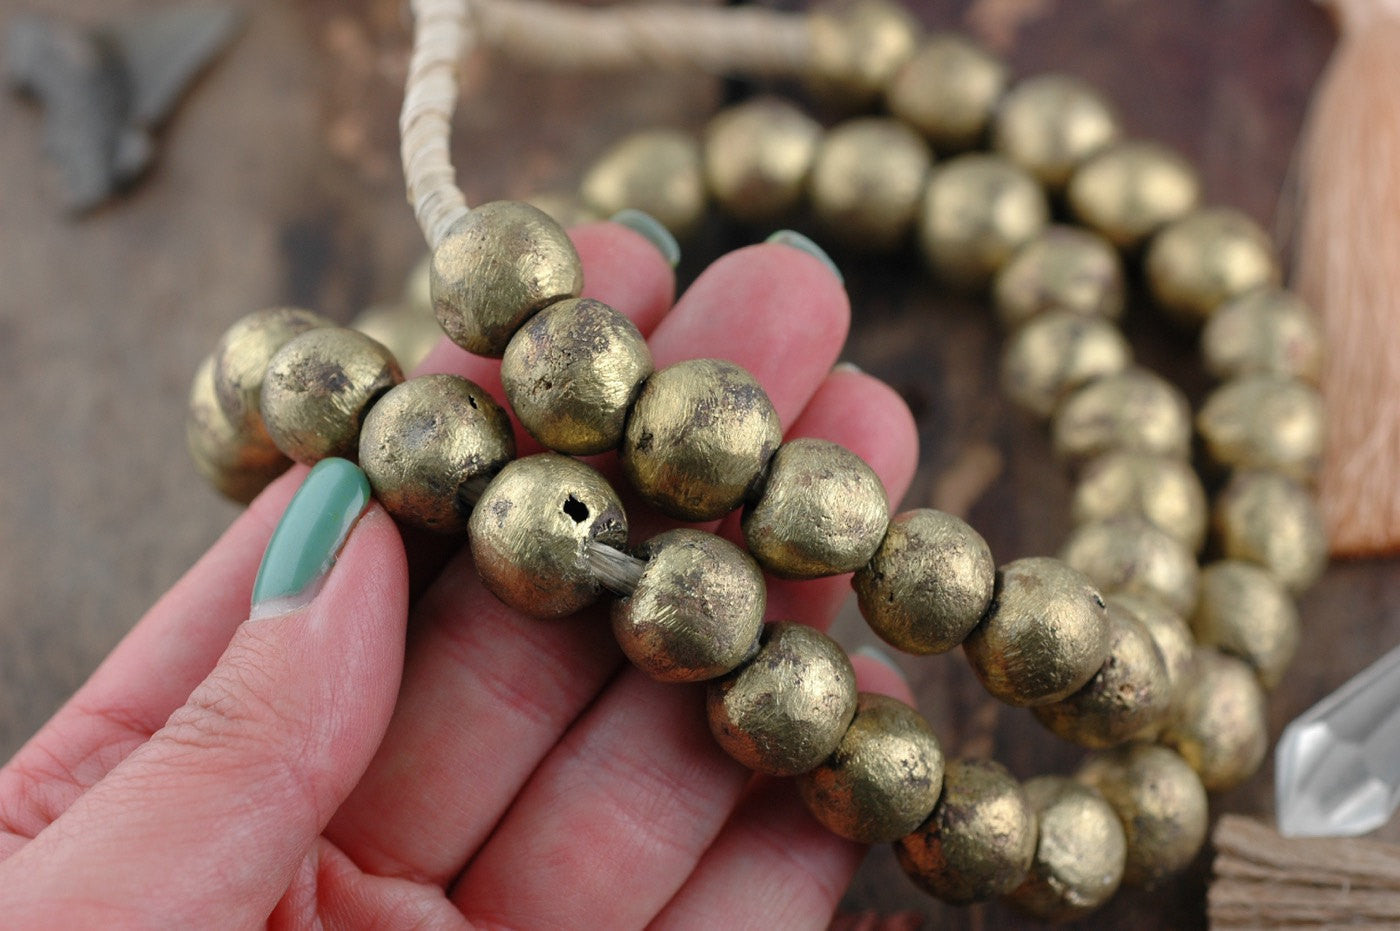 Orbiting: Round Brass African Beads, from Cameroon, 15-16mm, Authentic Tribal Jewelry, Golden Metallic Large Beads, Jewelry Making Supply - ShopWomanShopsWorld.com. Bone Beads, Tassels, Pom Poms, African Beads.